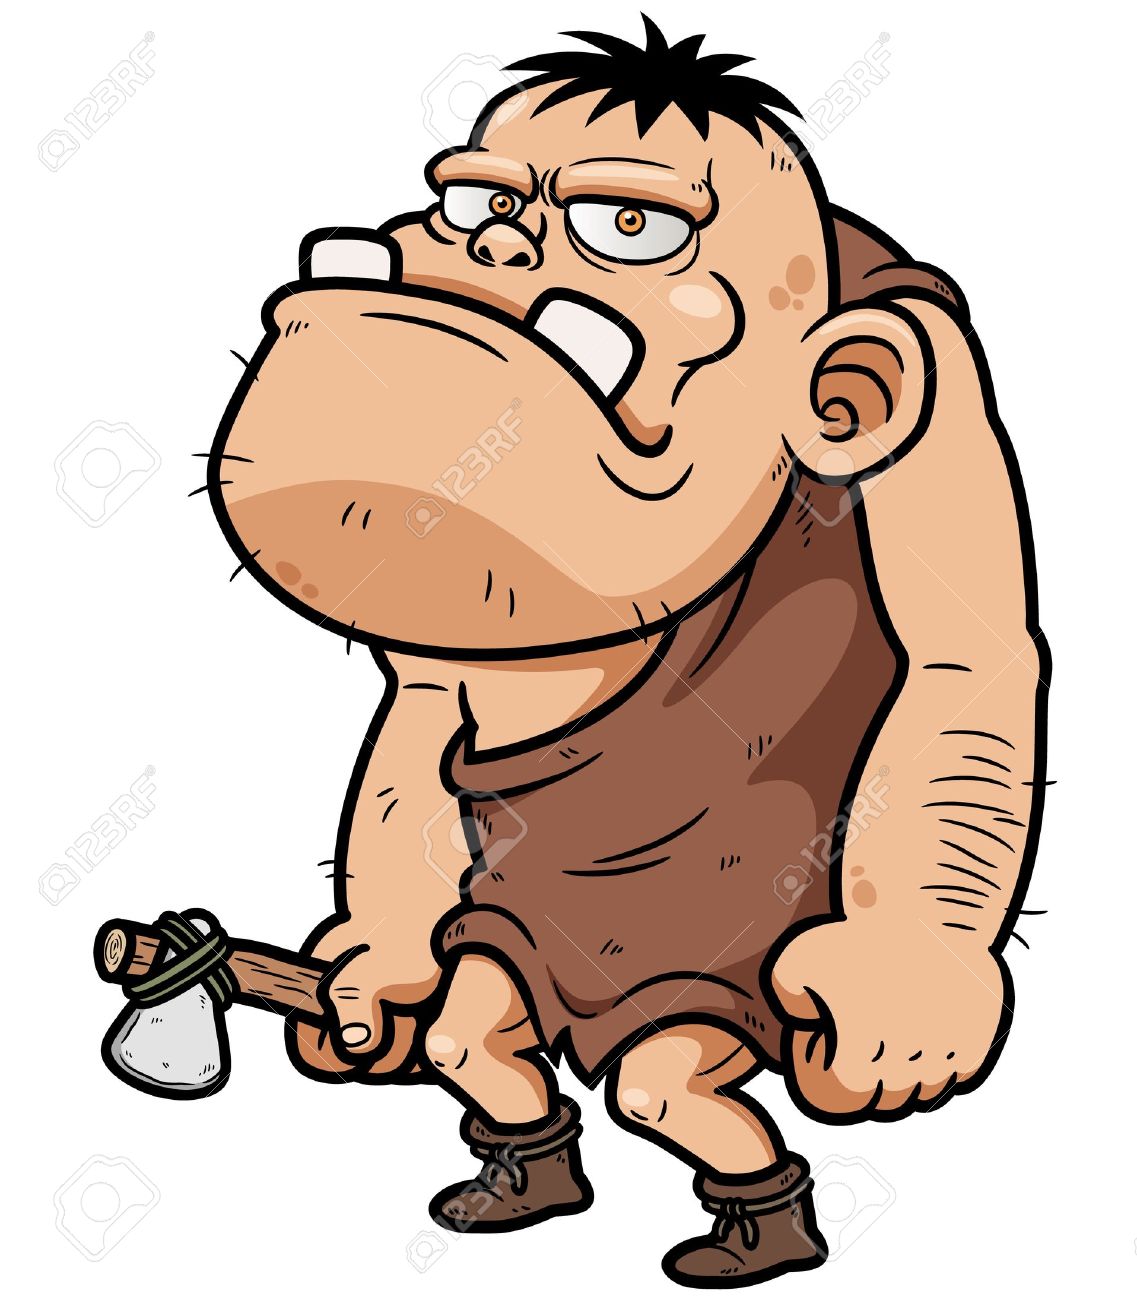 Caveman clipart neolithic era.  collection of people